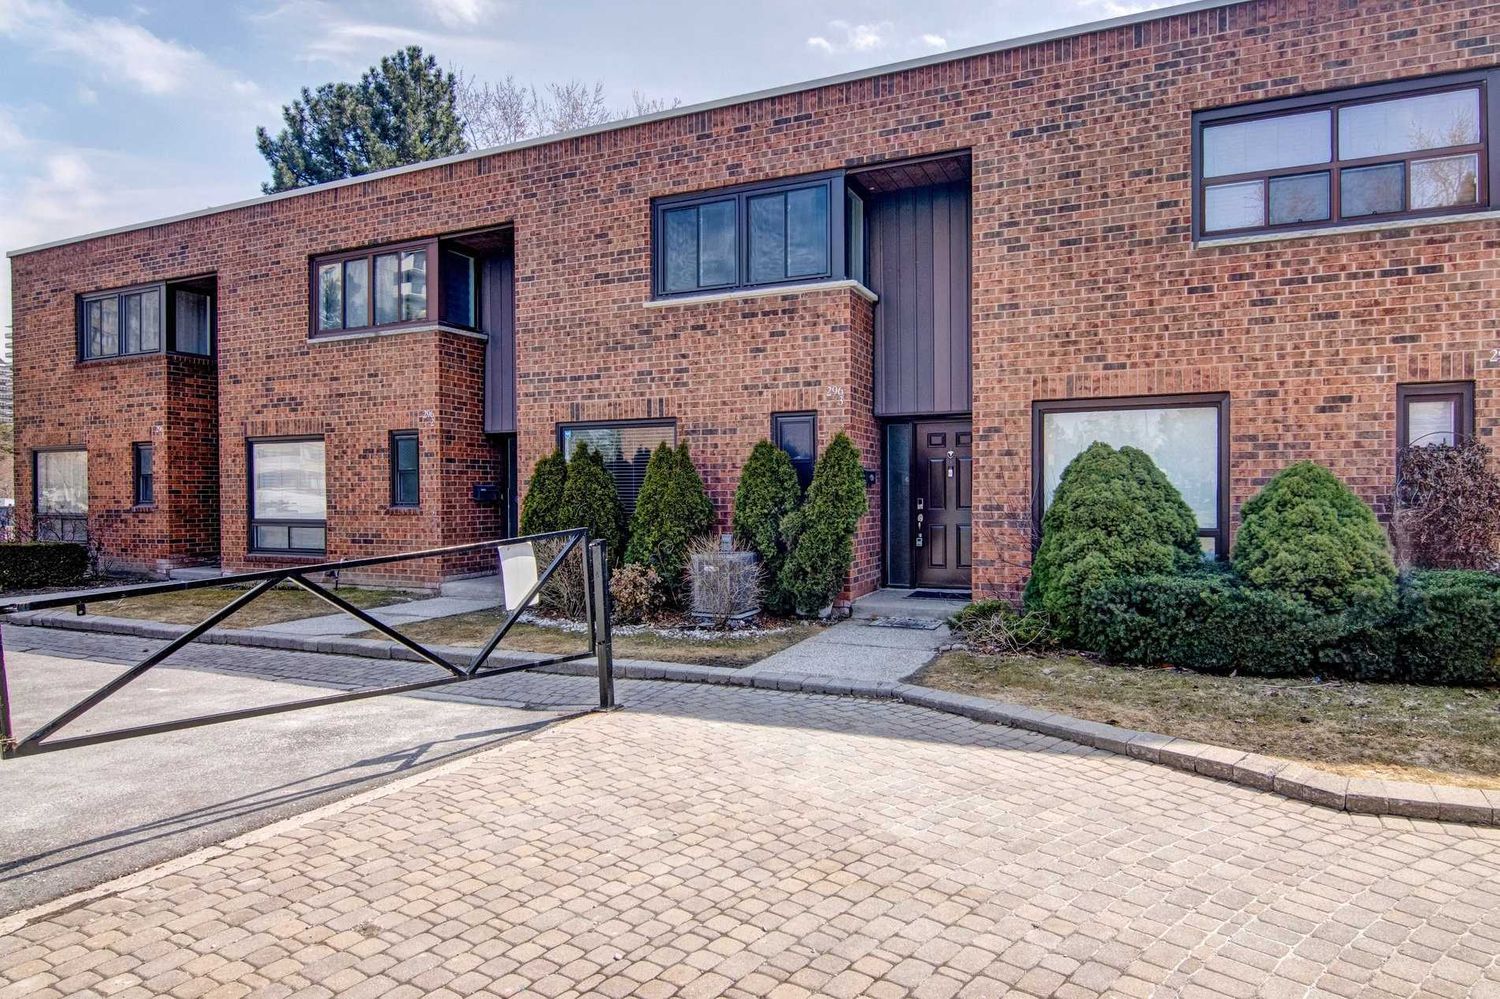 296-322 Torresdale Avenue. 1329 Steeles Townhouses is located in  North York, Toronto - image #2 of 2